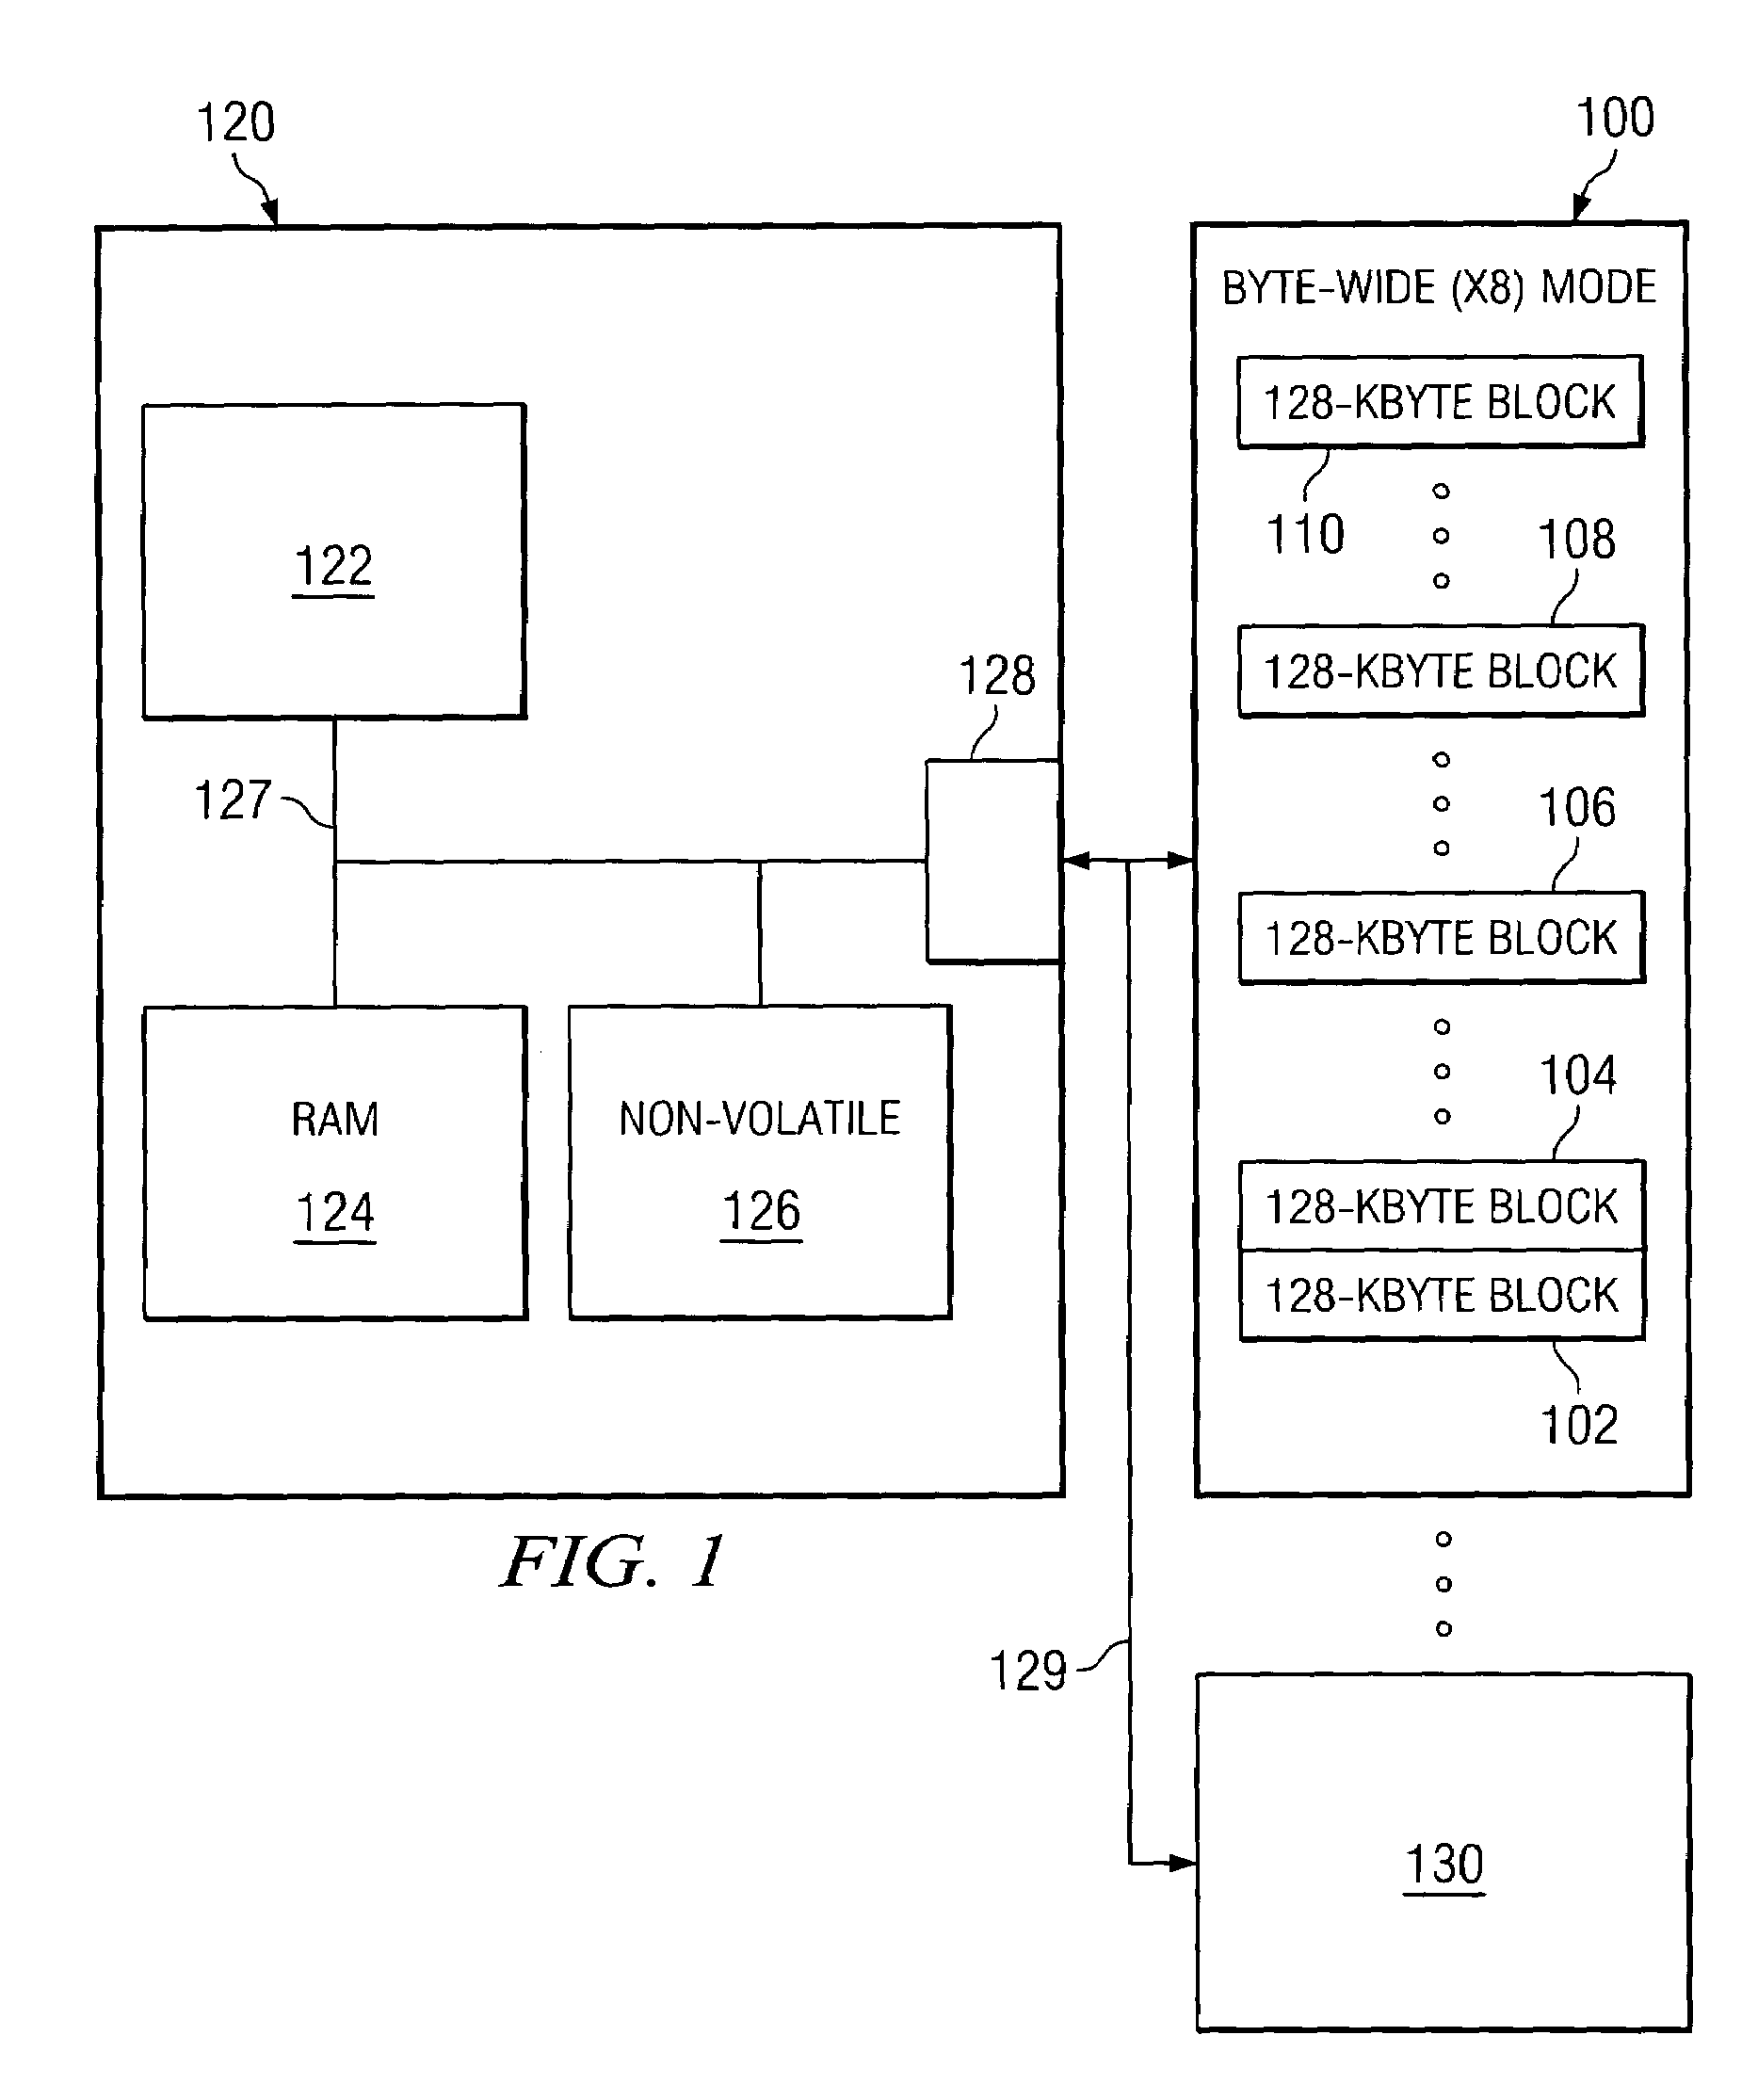 Method and system for improving usable life of memory devices using vector processing